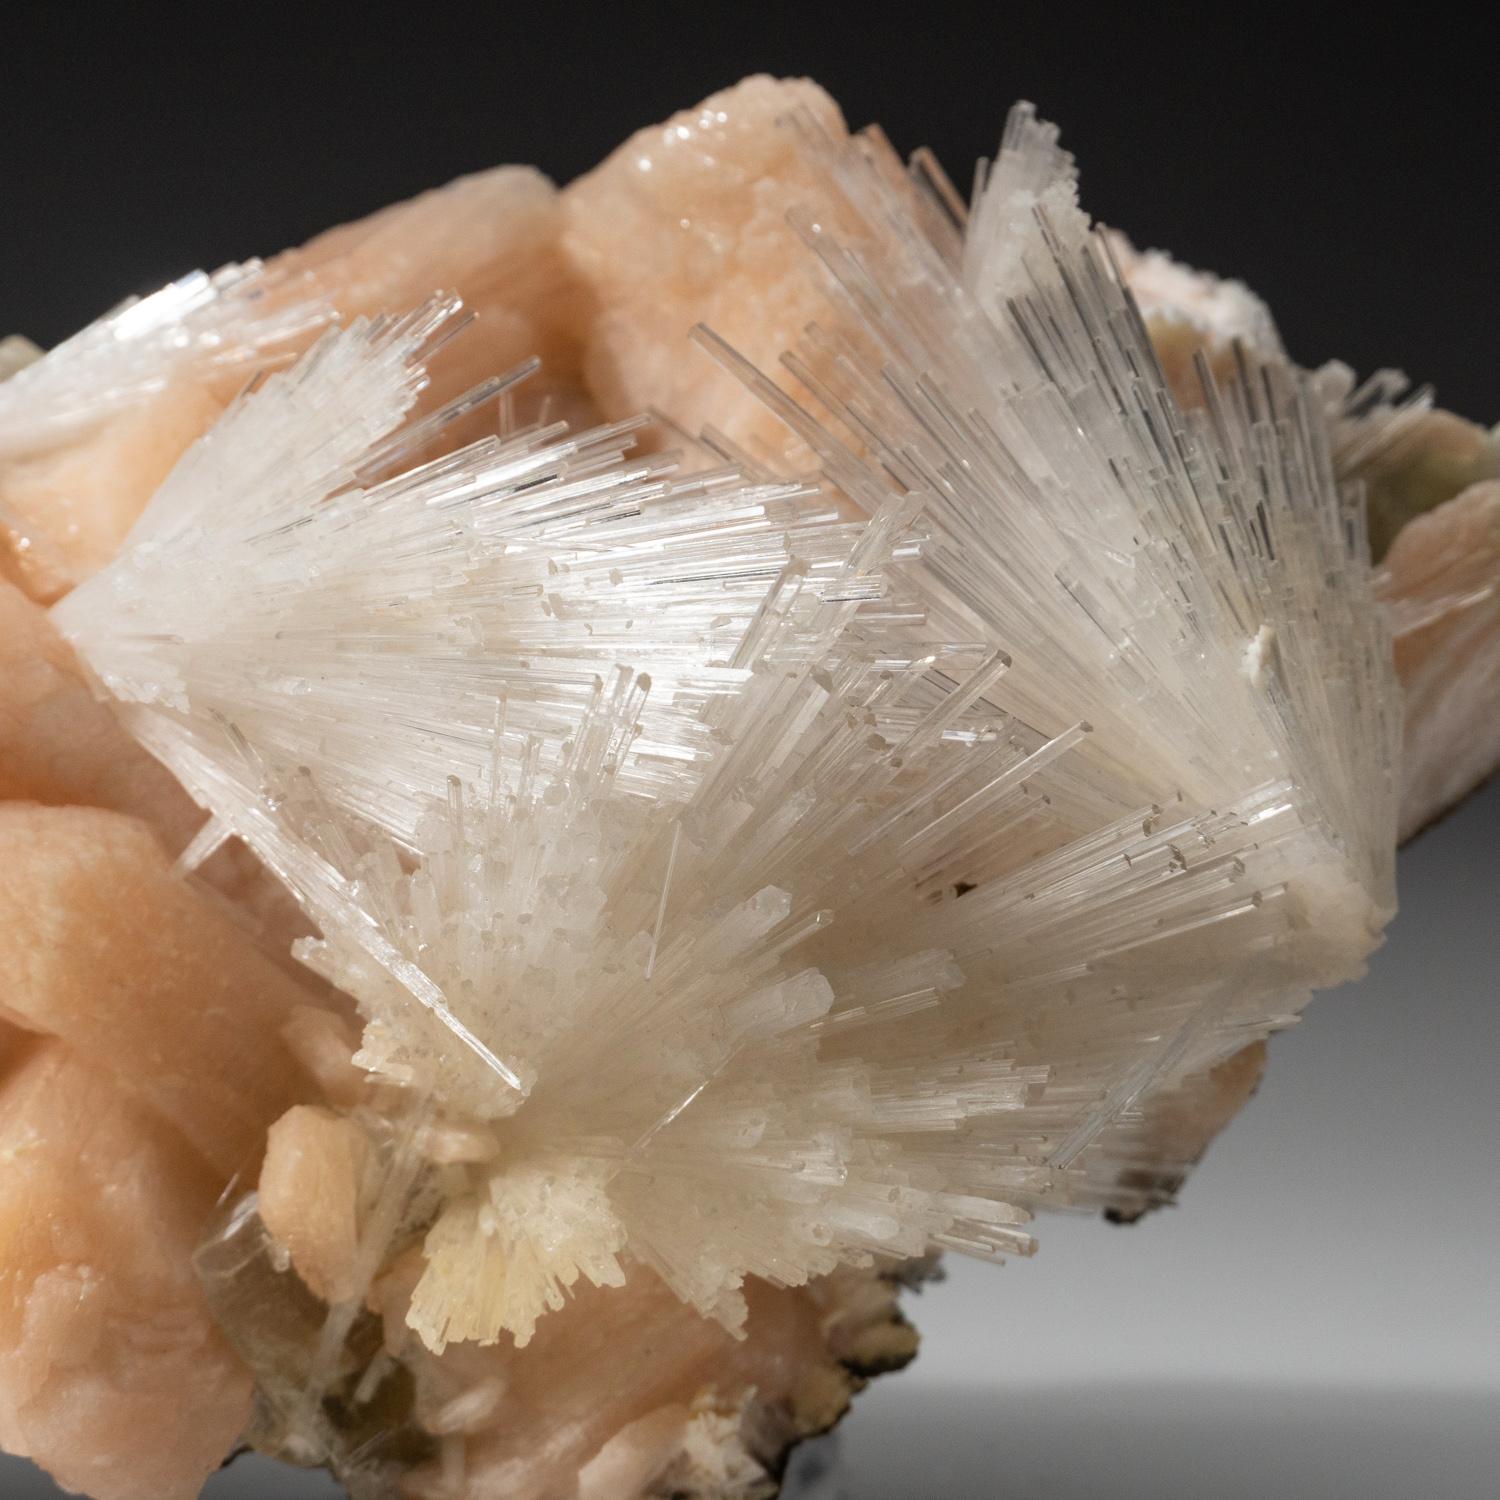 From Nasik District, Maharashtra, India

Large lustrous cluster of intersecting acicular sprays of scolectite crystals with matrix. The scolecite crystals have glassy crystal faces and are mostly translucent with transparent four-sided pyramidal